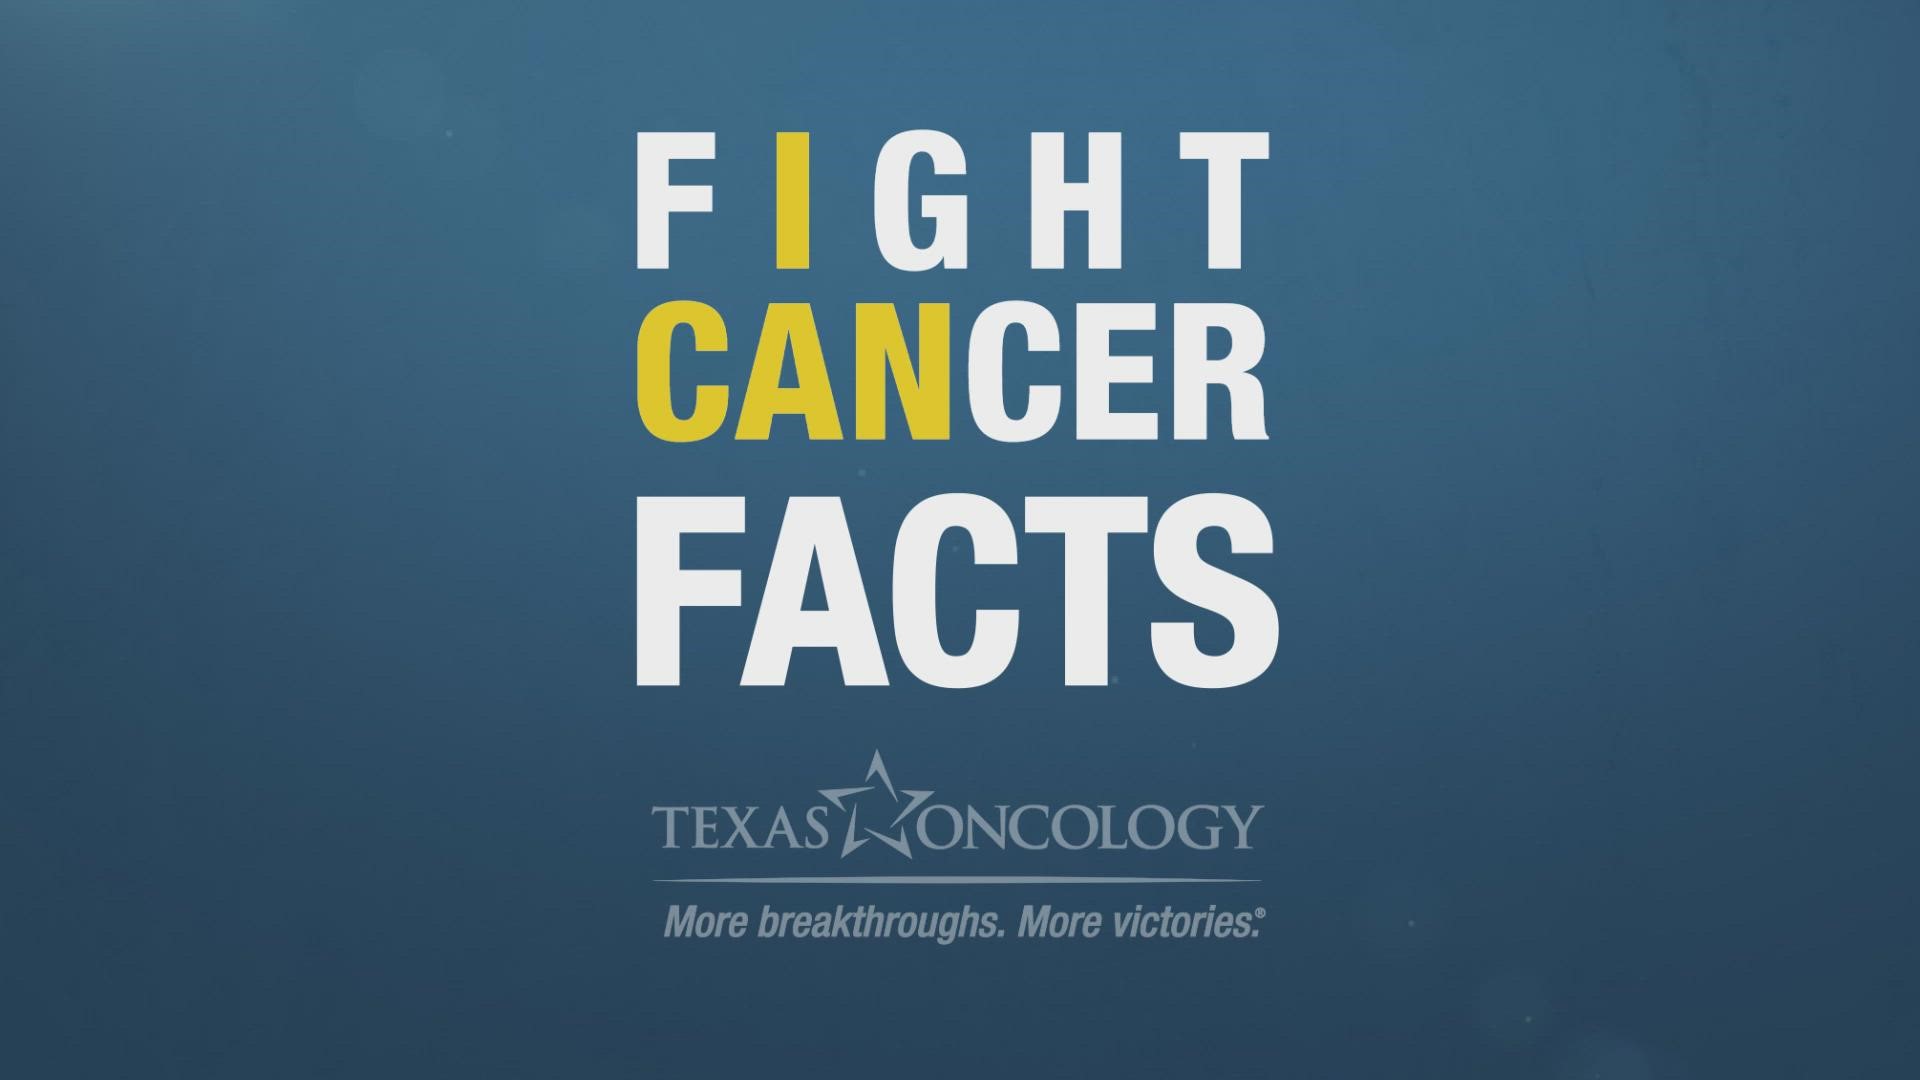 Local Texas Oncology doctor explains how Texas researchers are working to improve lung cancer detection.